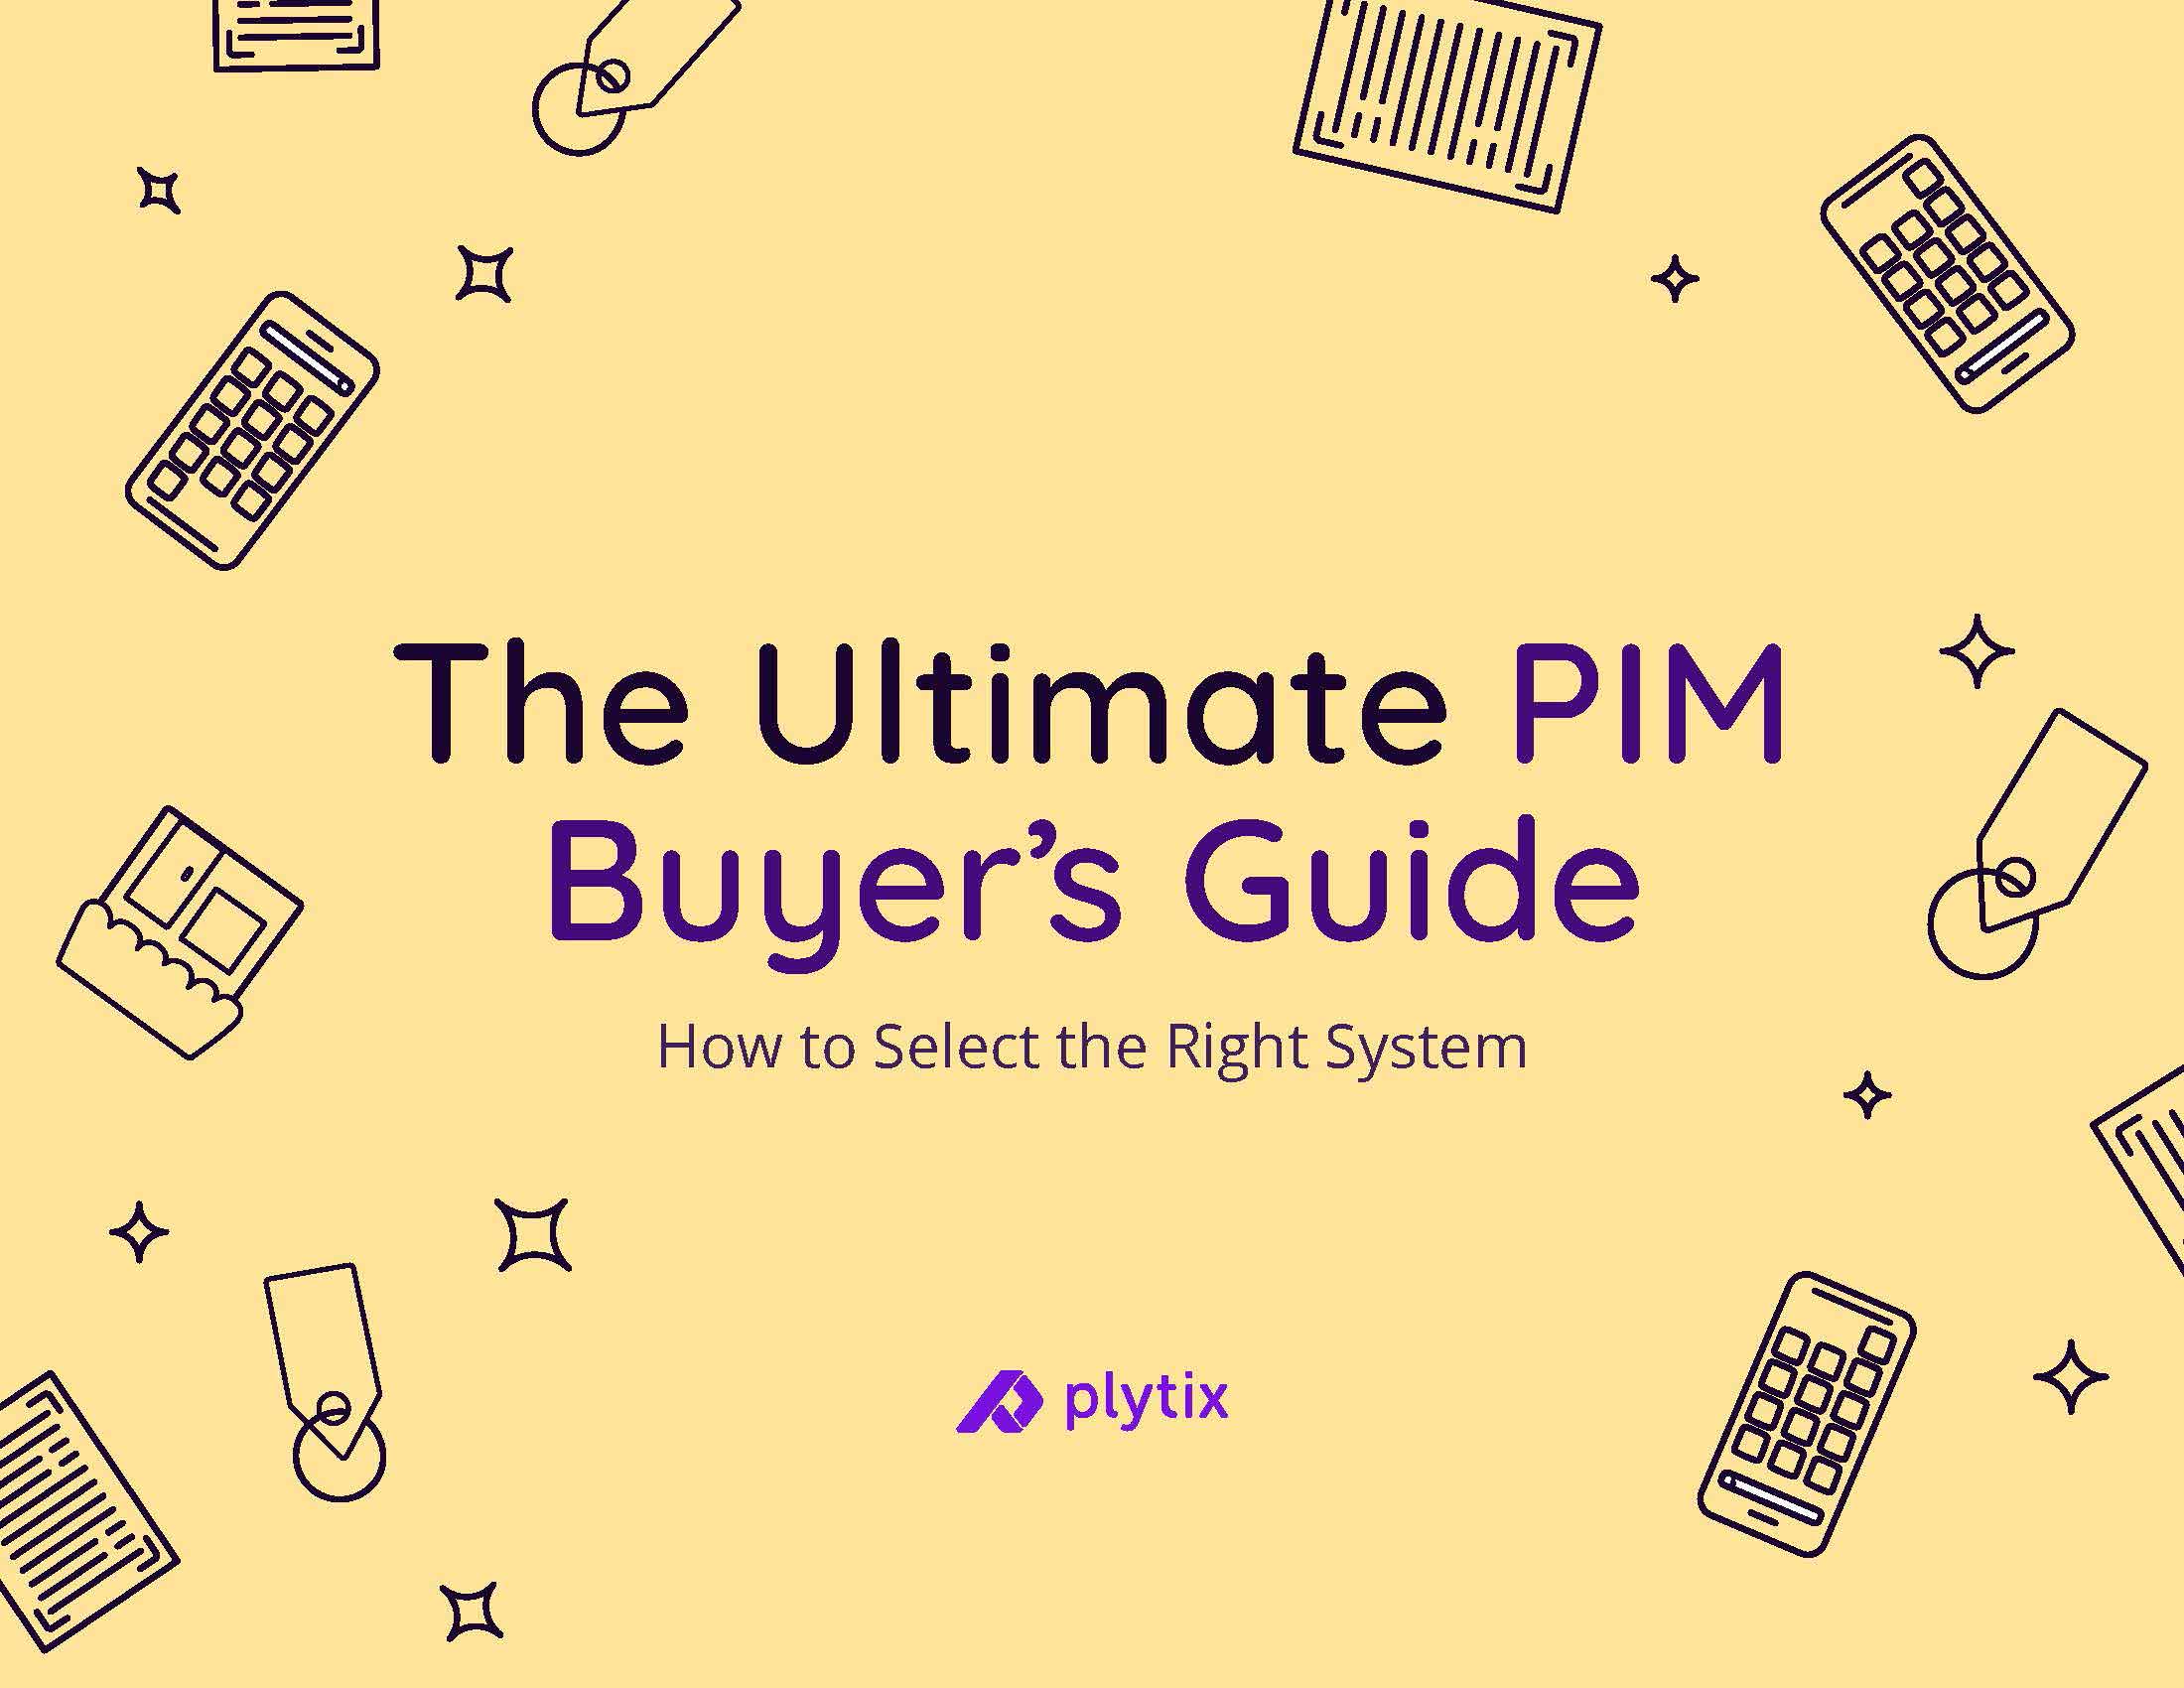 The Ultimate PIM Buyer's Guide